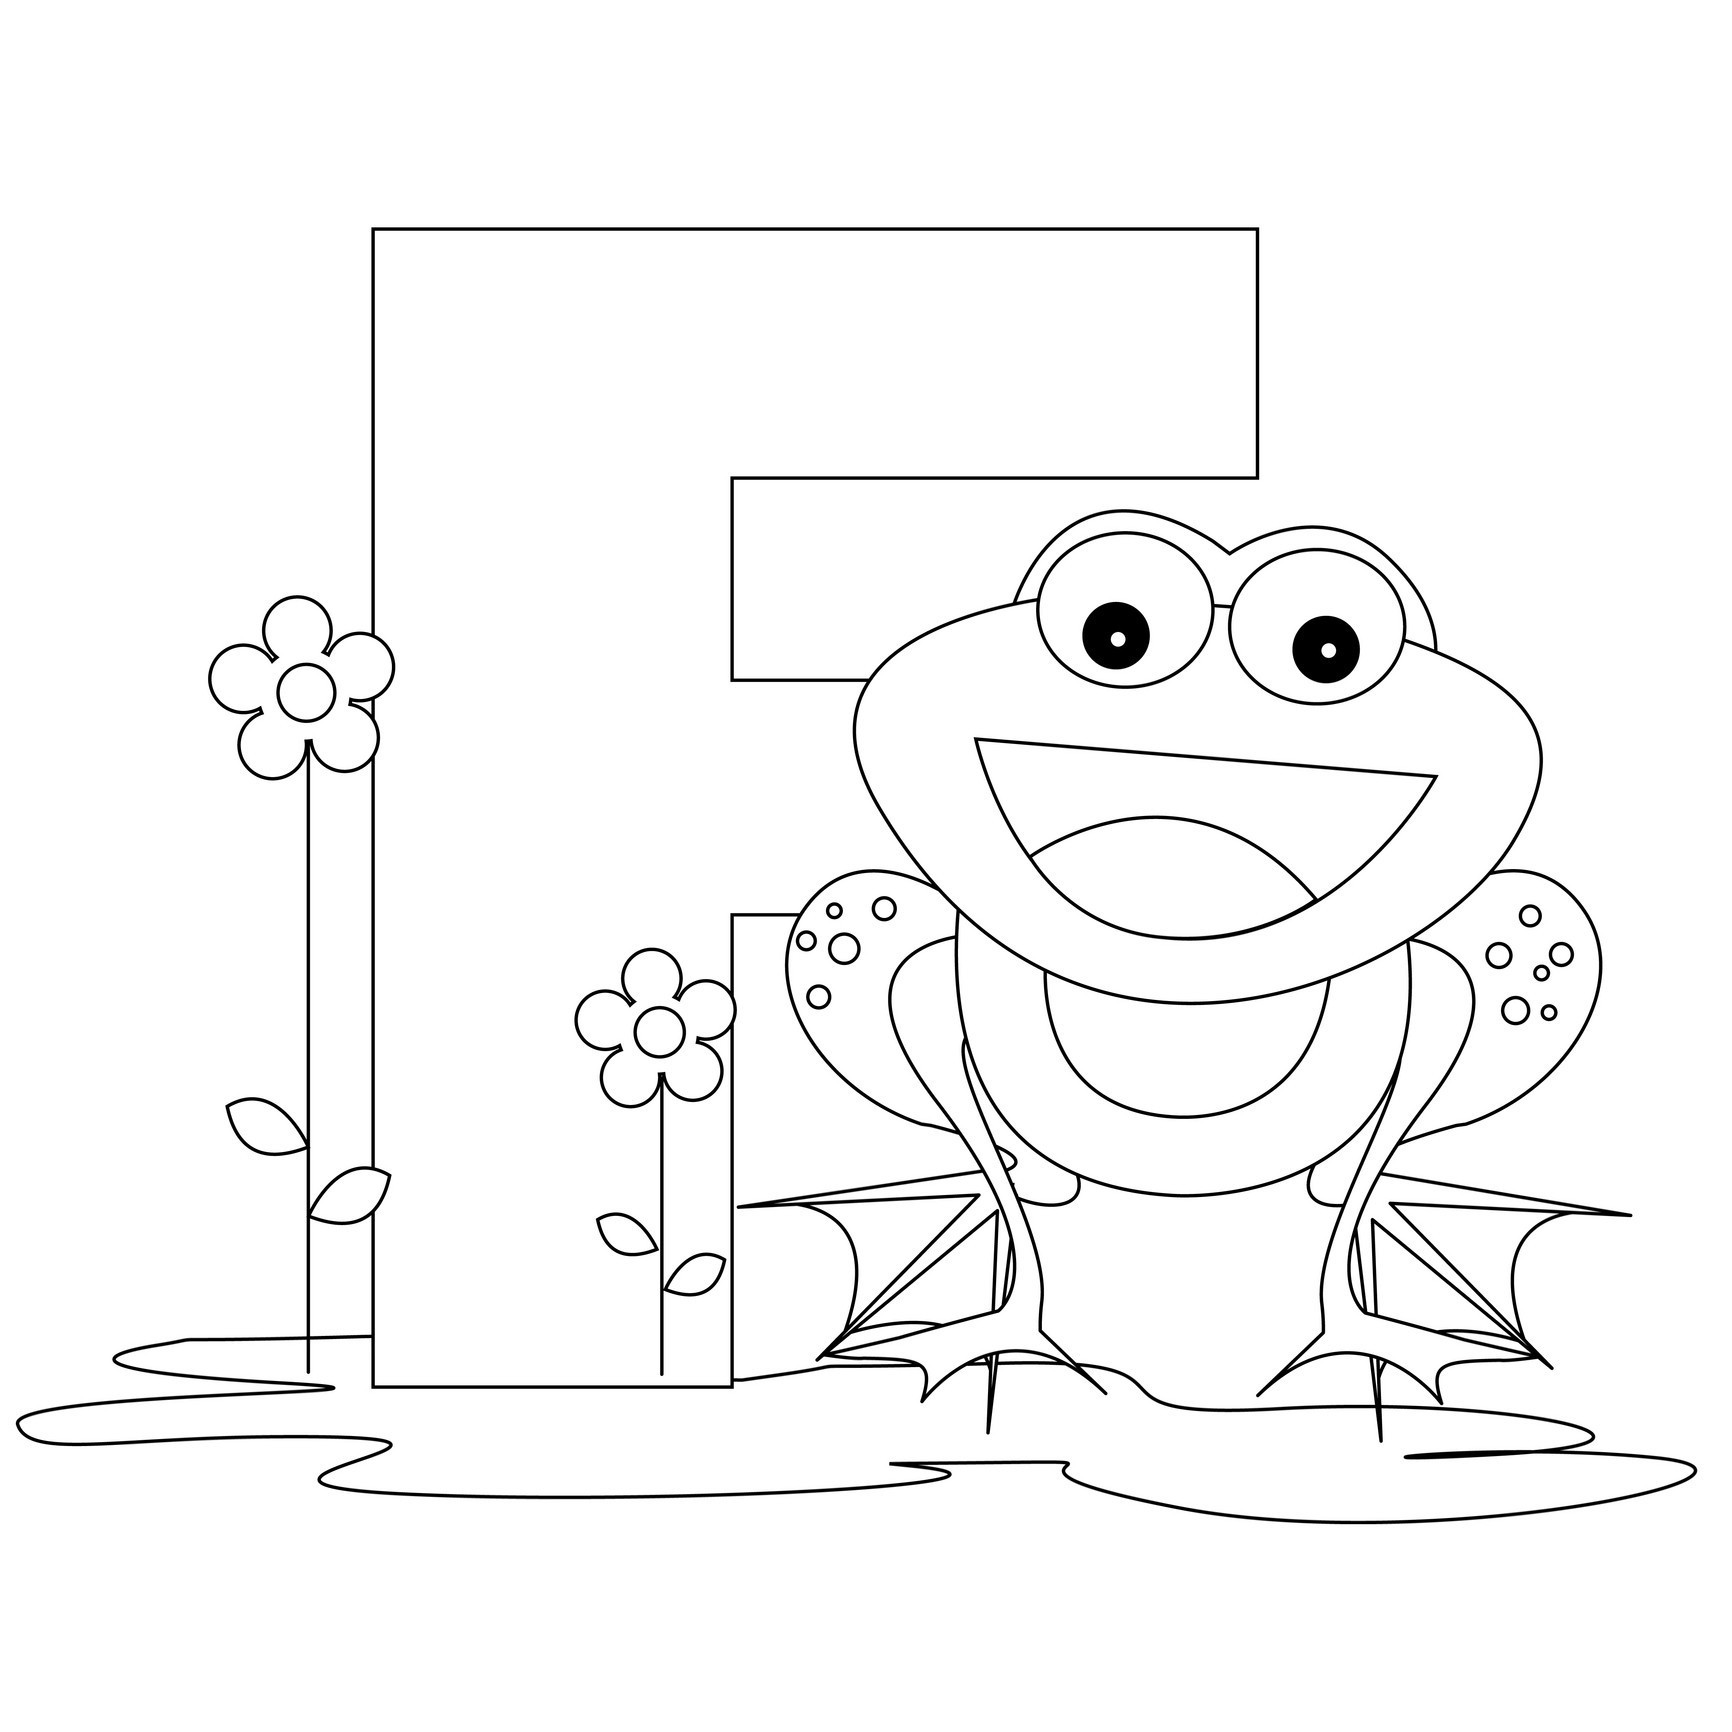 Alphabet Coloring Pages Pdf
 coloring pages printable letters of the alphabet printable